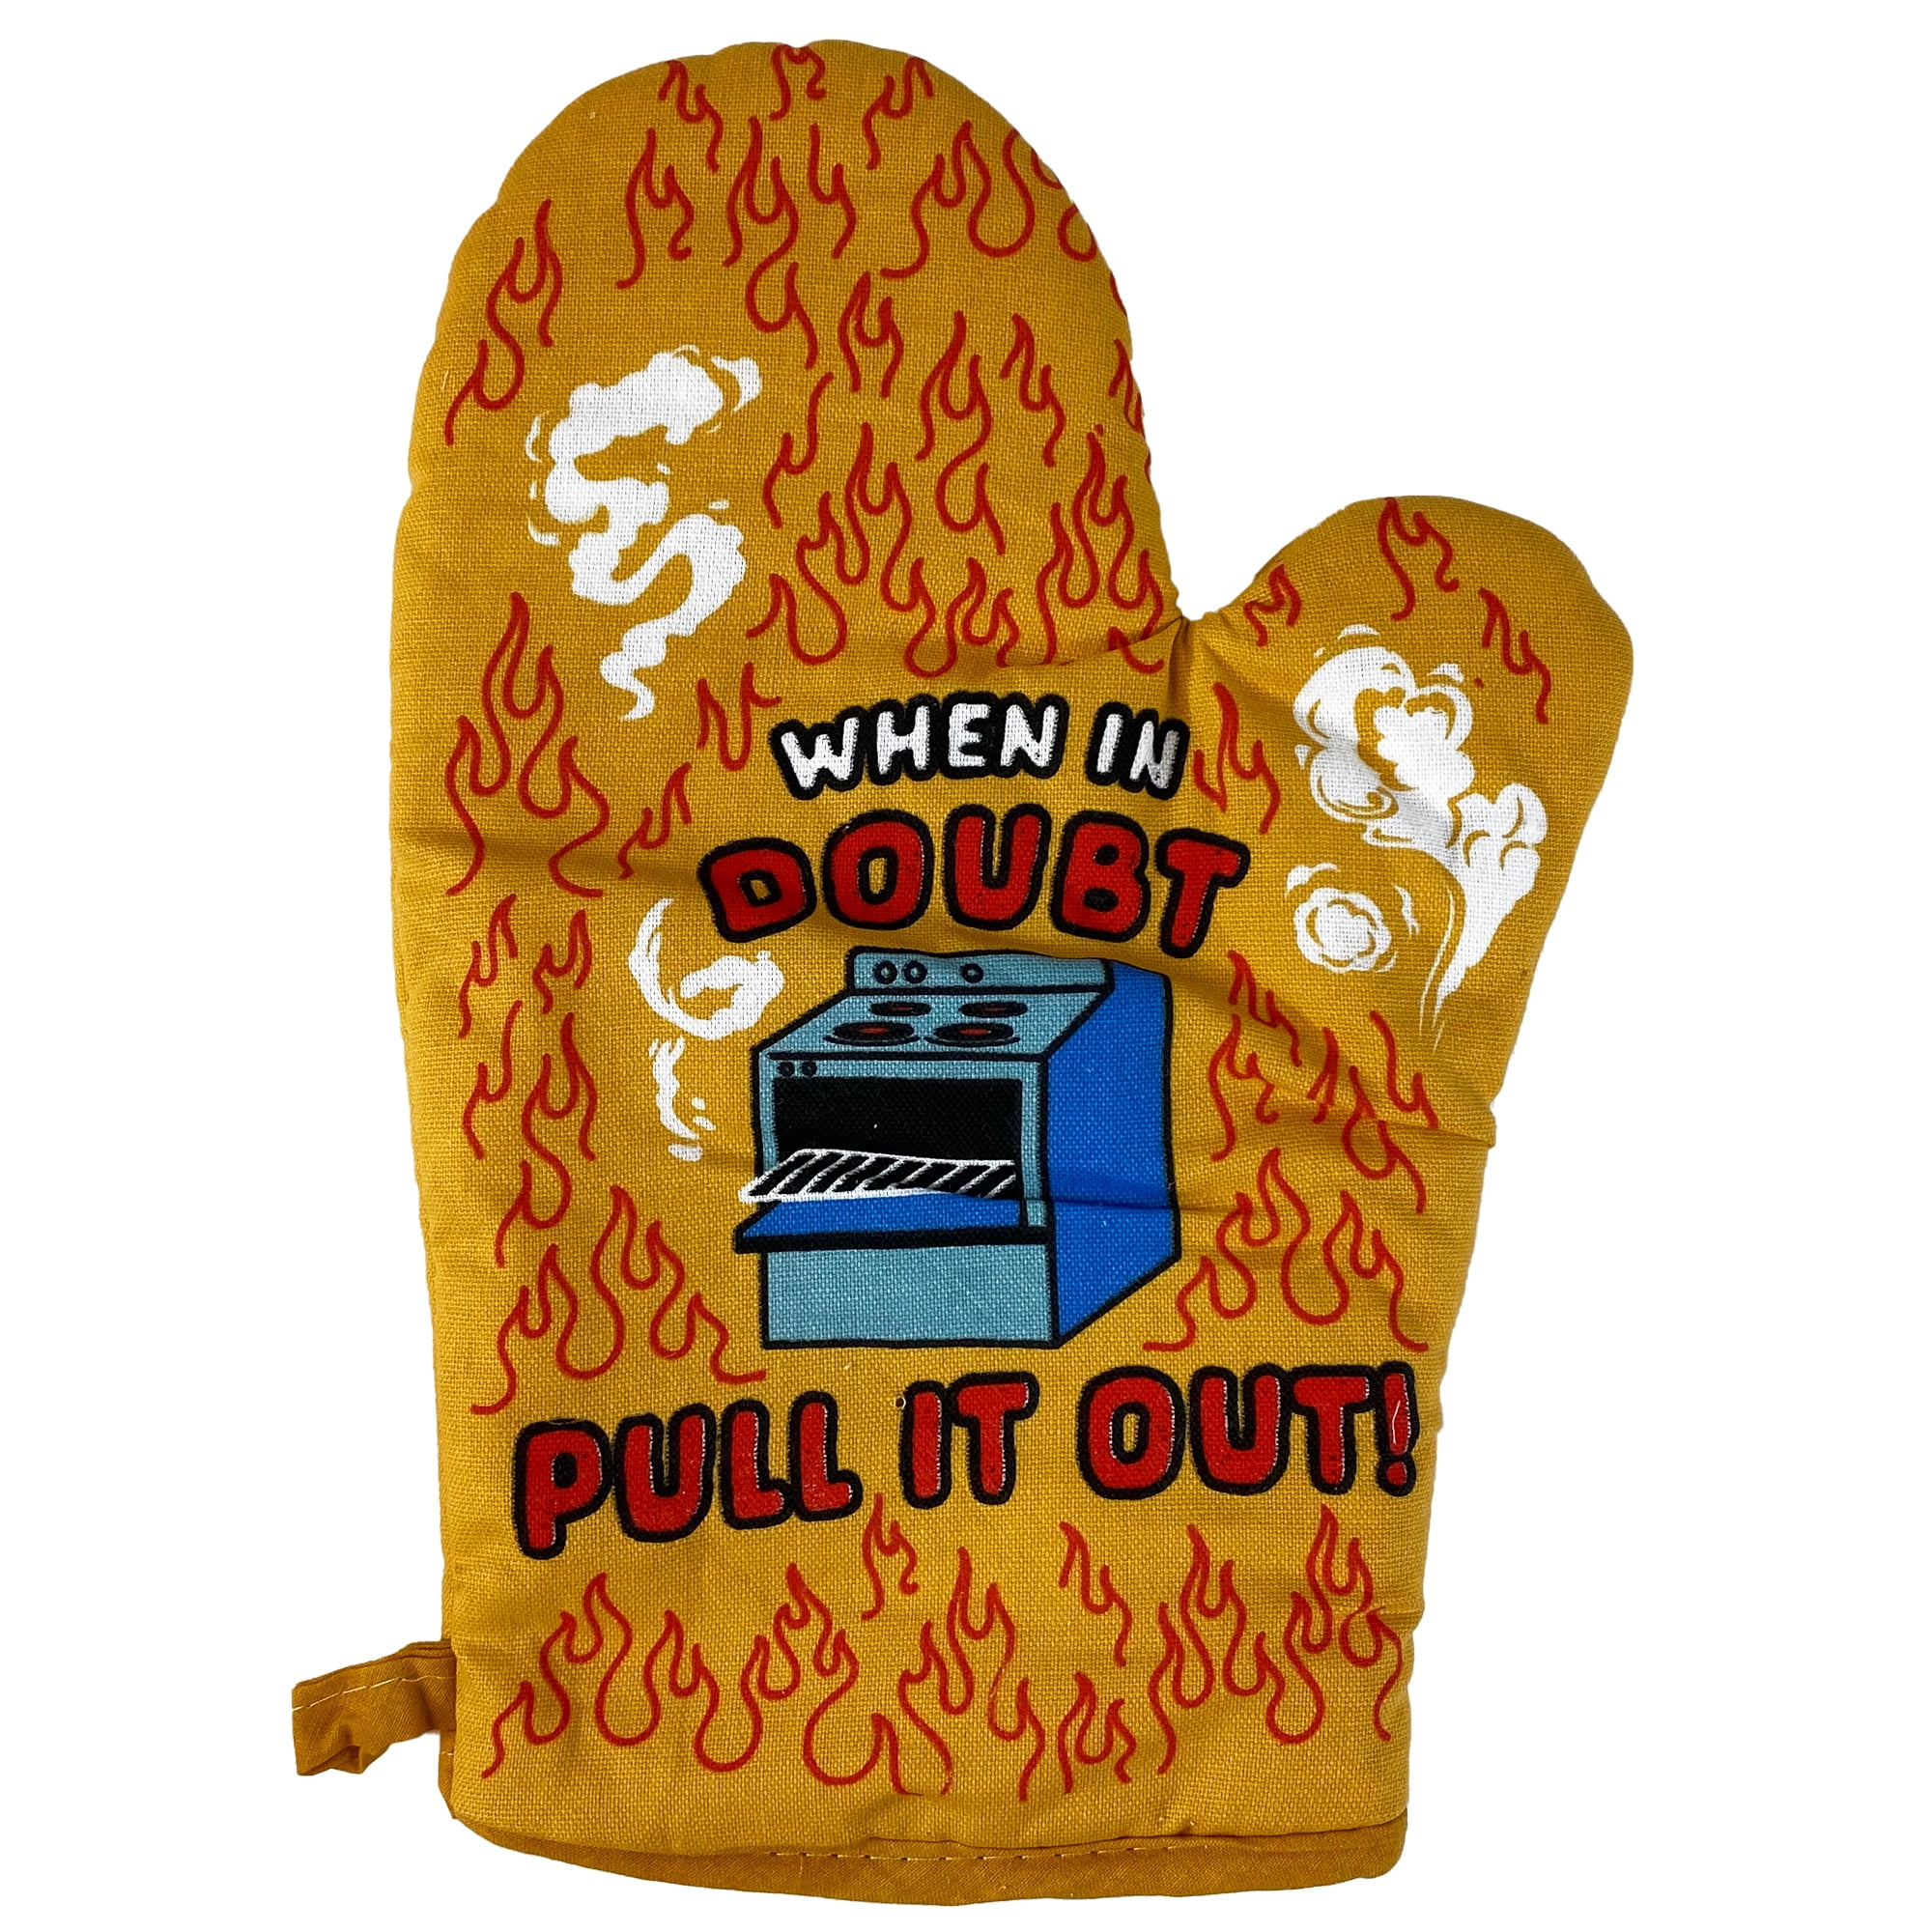 When In Doubt Pull It Out Bulk Oven Mitts | Funny Wholesale Mitts | 4 Pack